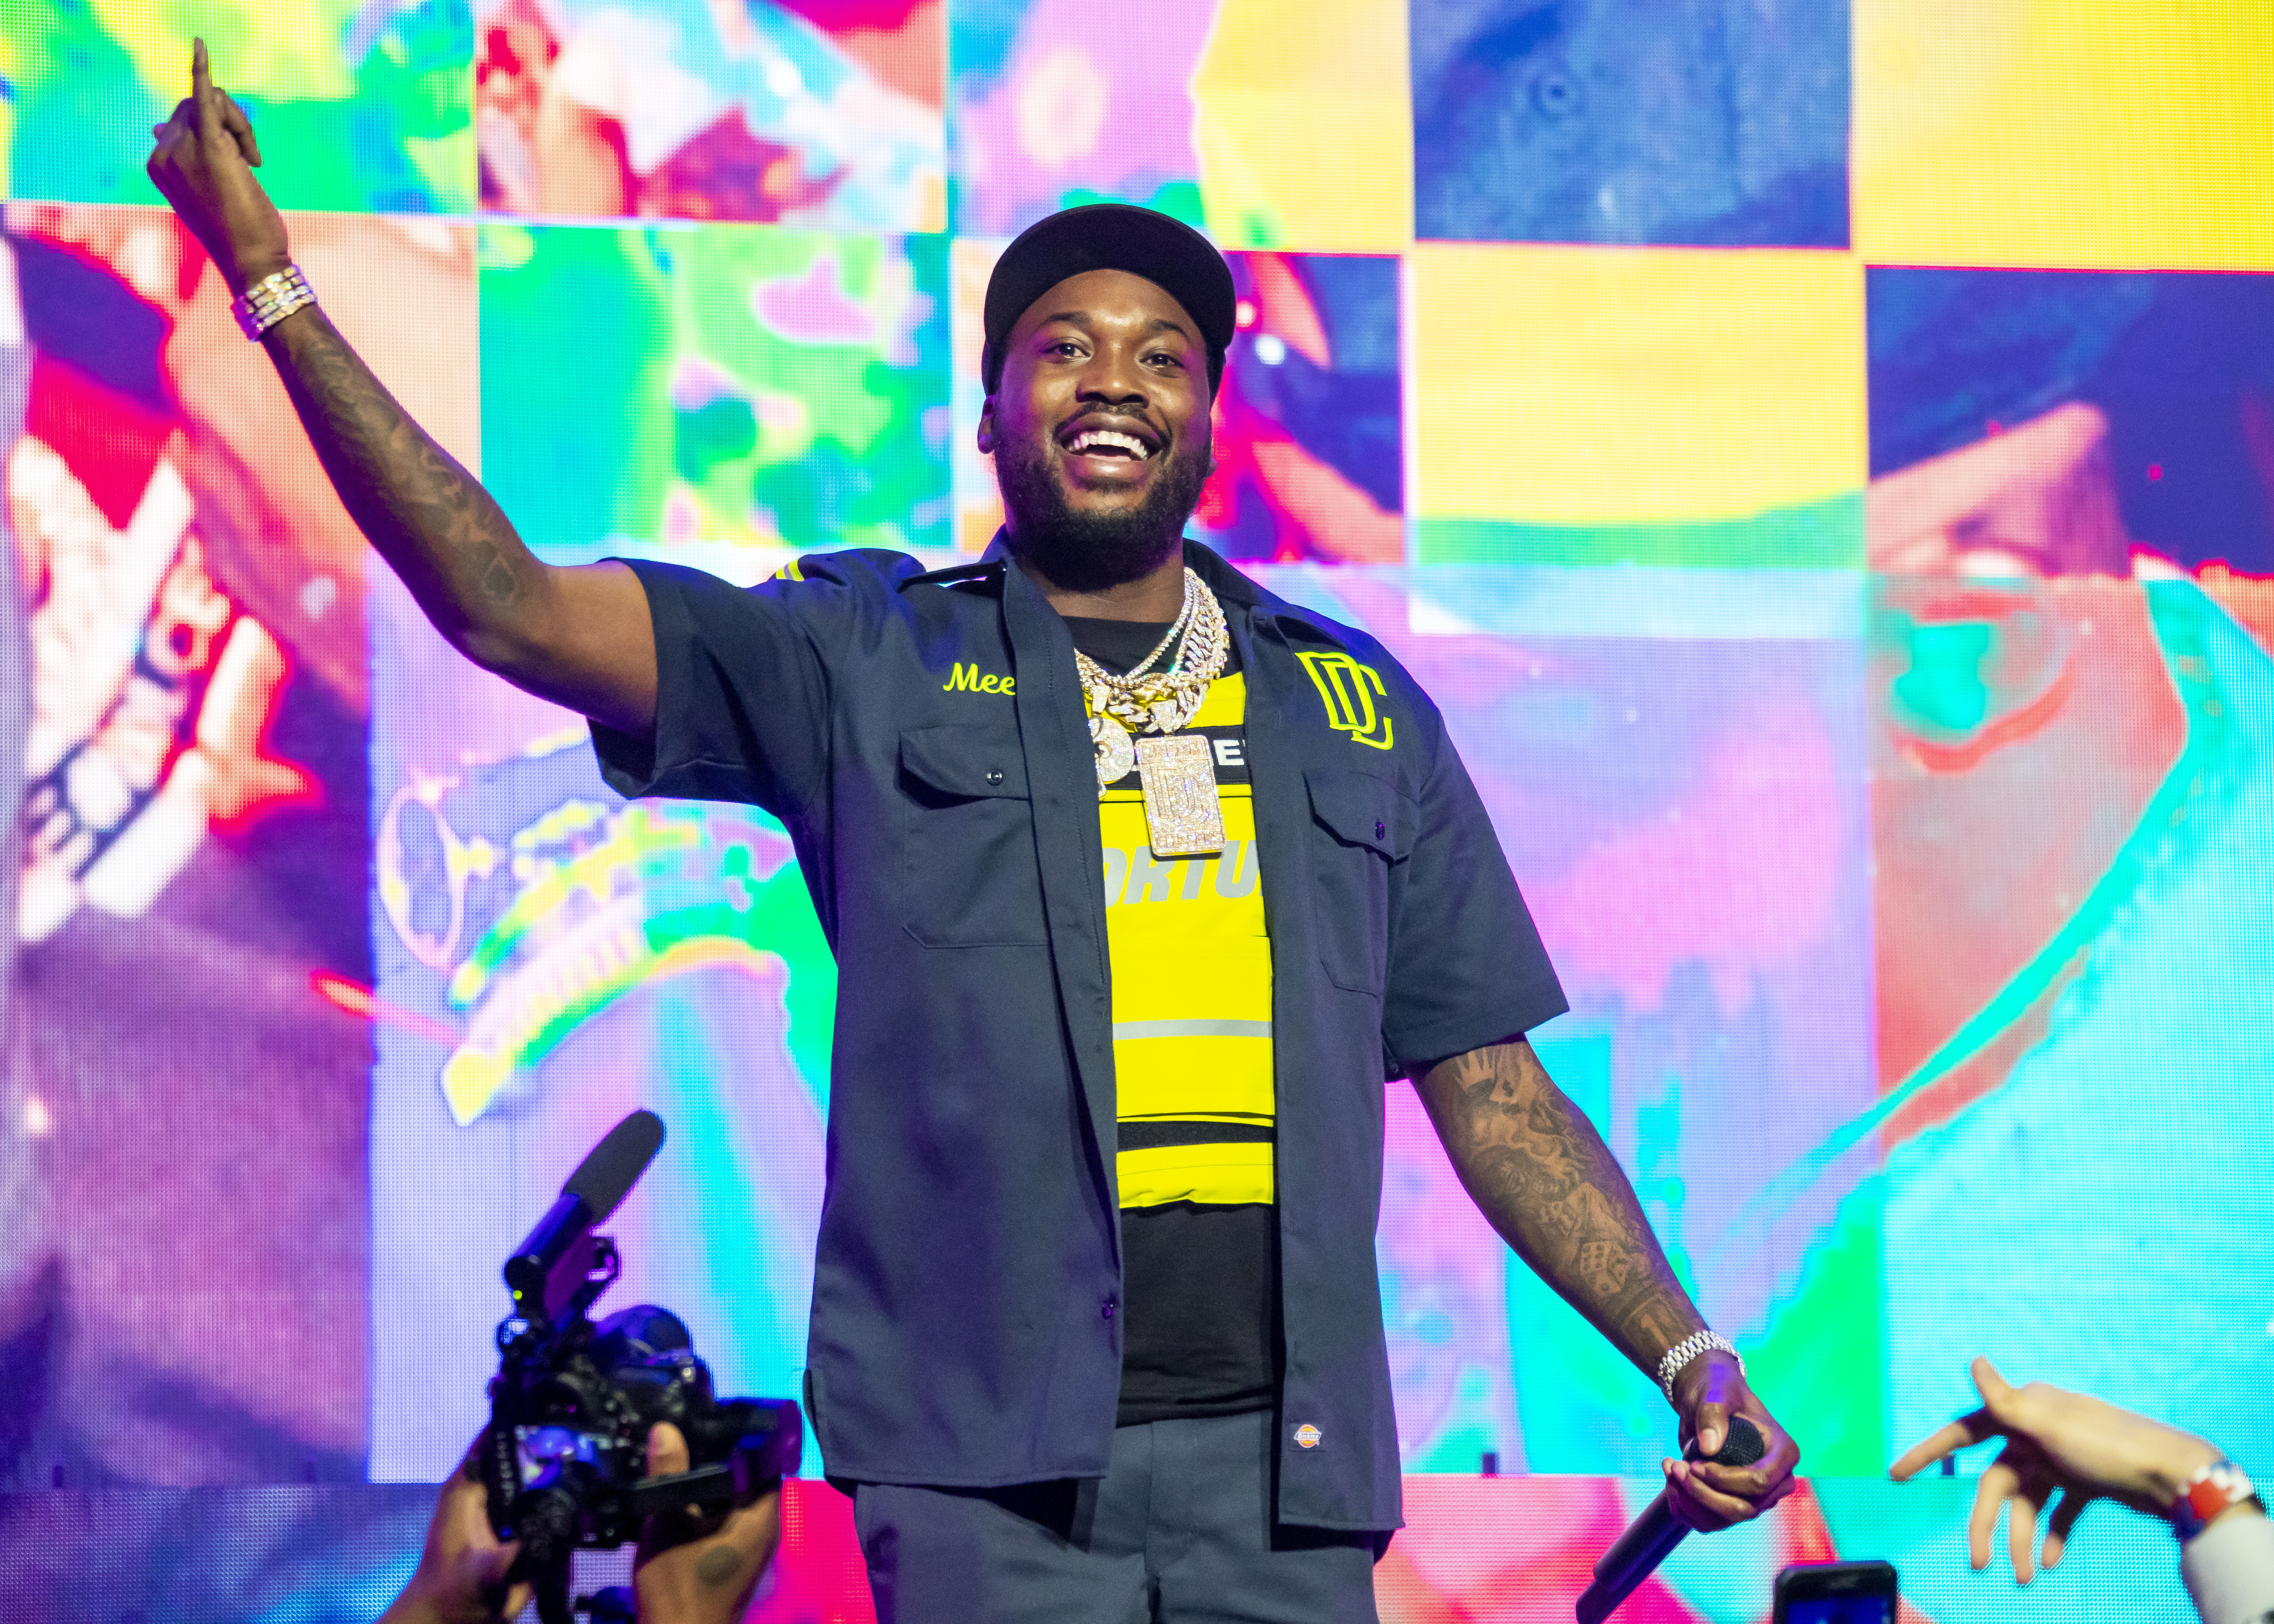 Meek Mill Vows To Make $10M On All His Future Albums After Revealing He Made 13 Percent Of Earnings From 'Expensive Pain'